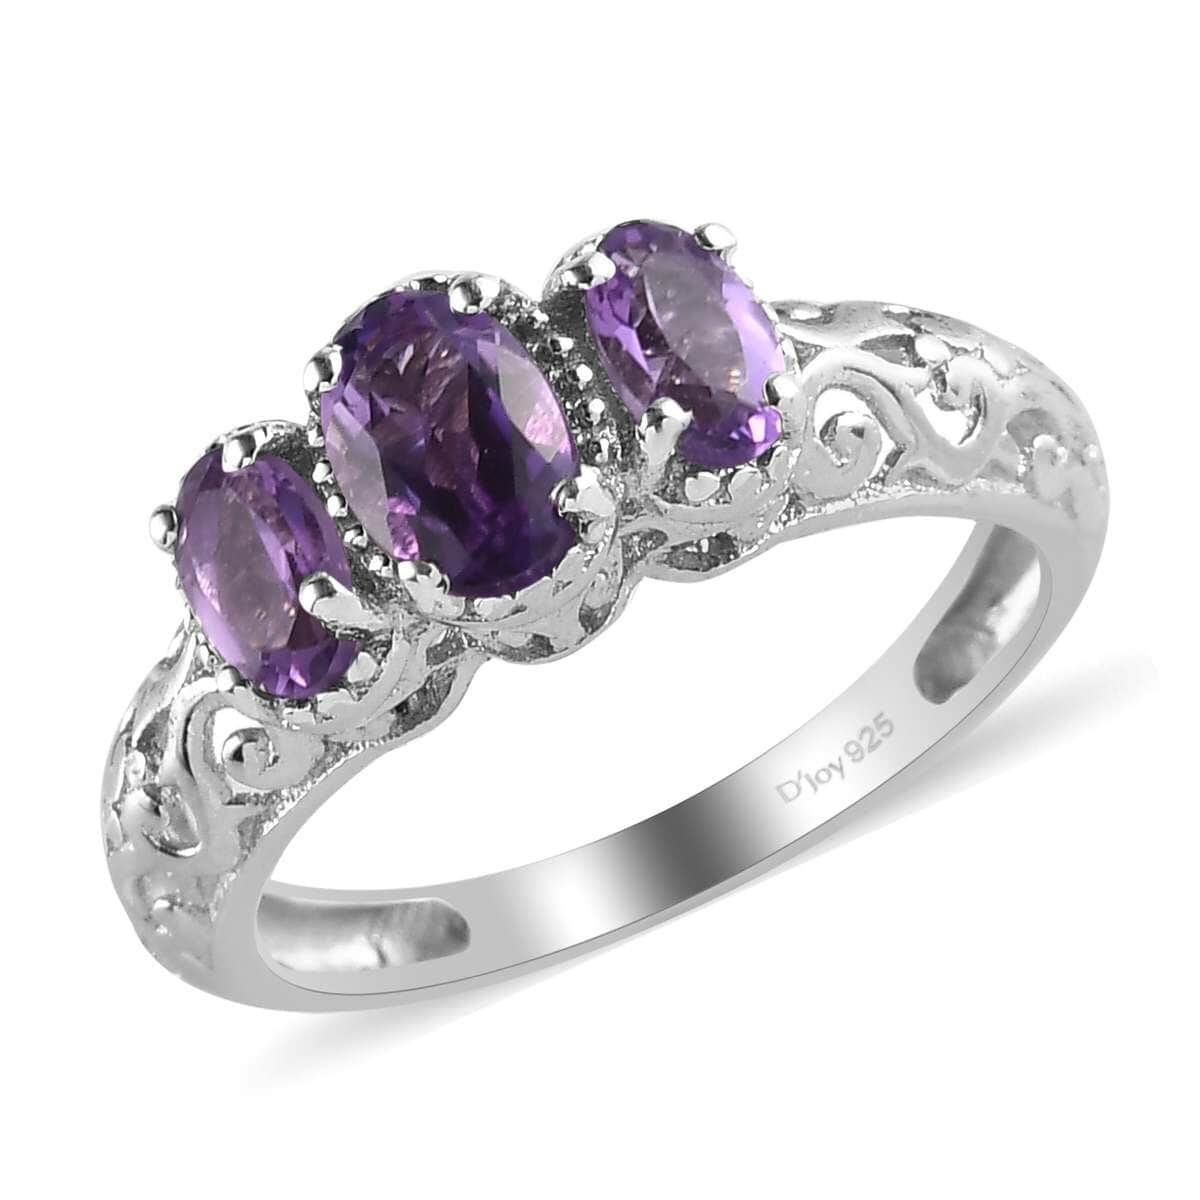 Amethyst Ring, 3 Stone Amethyst Ring, Trilogy Ring, Sterling Silver Ring, Birthstone Jewelry, Amethyst 3 Stone Ring 0.85 ctw image number 0